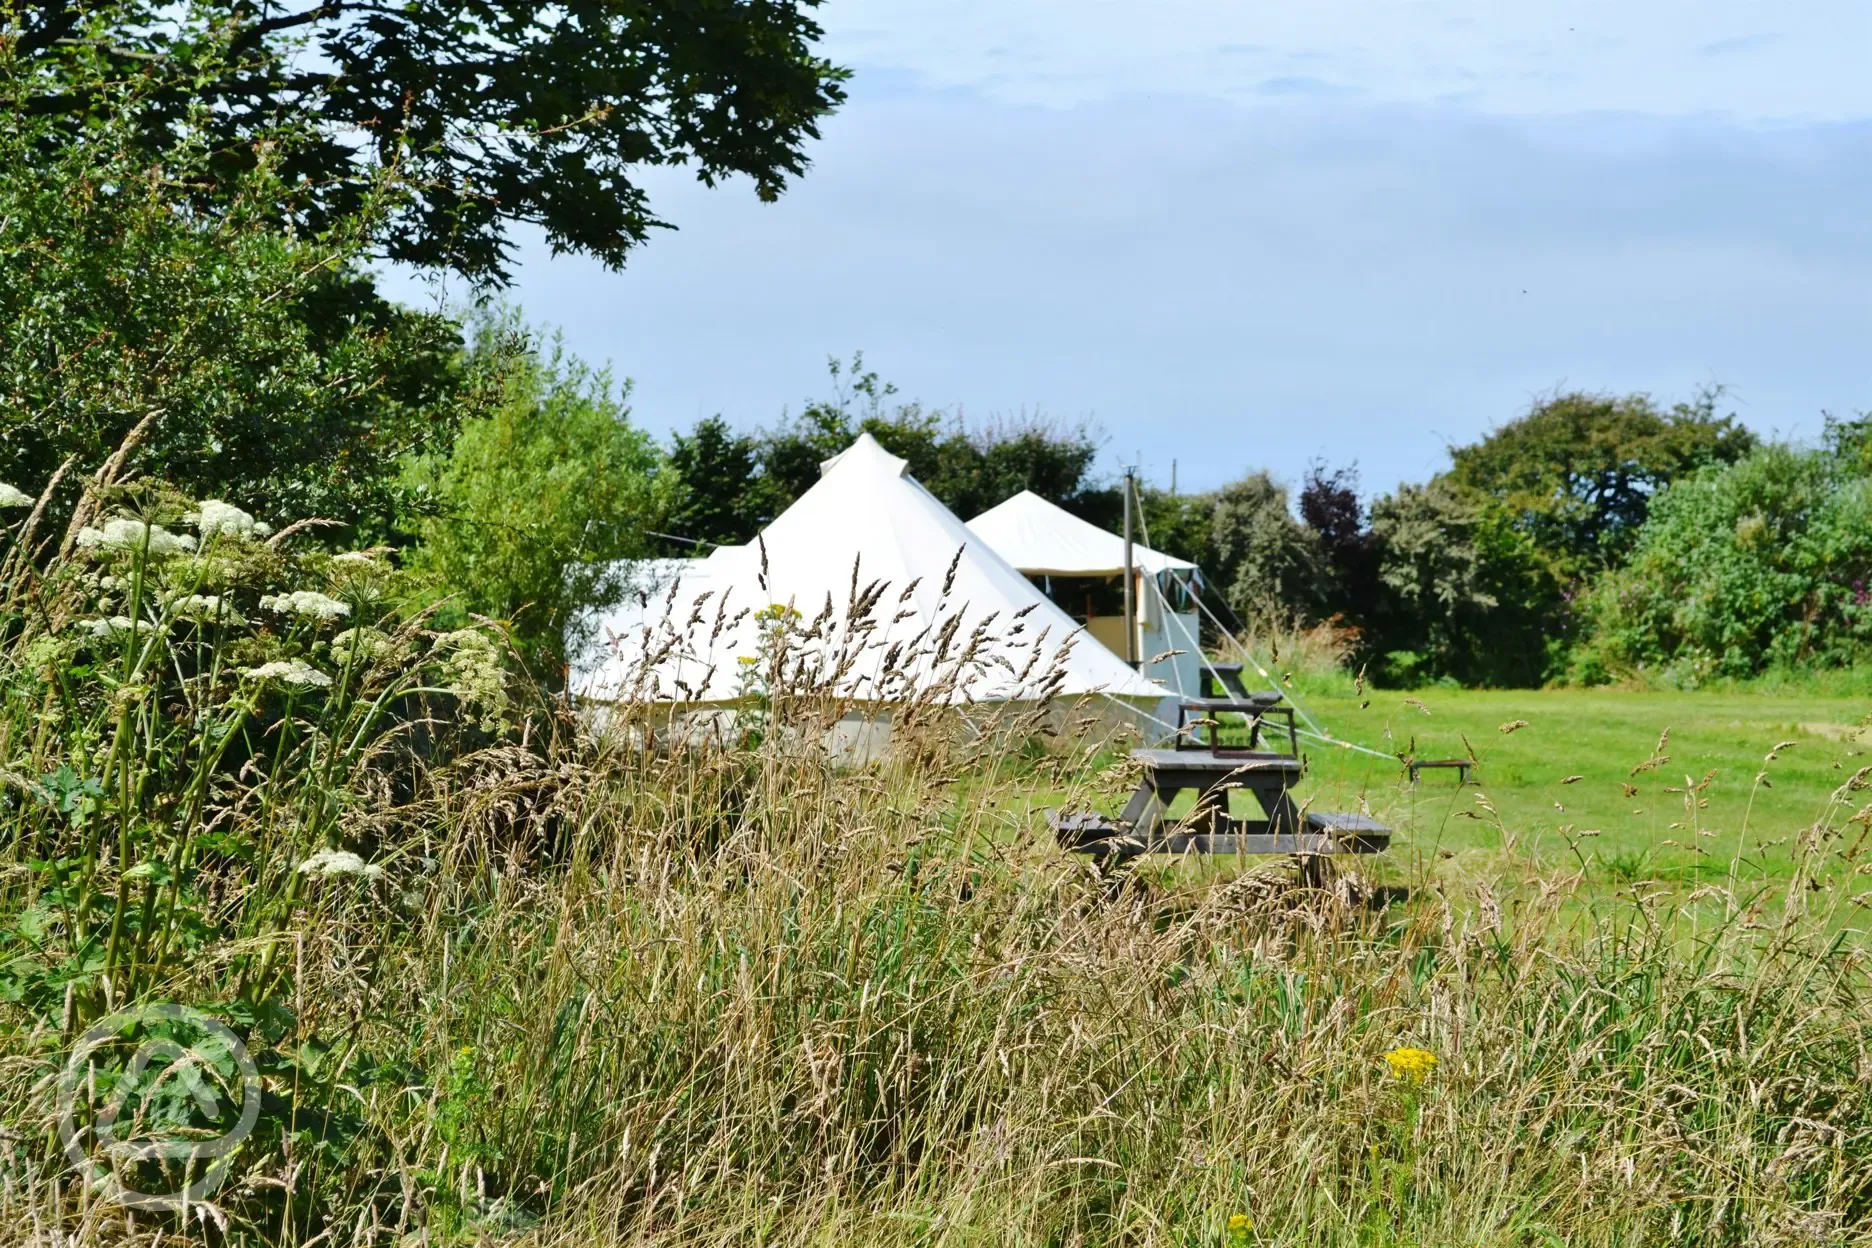 Camping pitch - main field